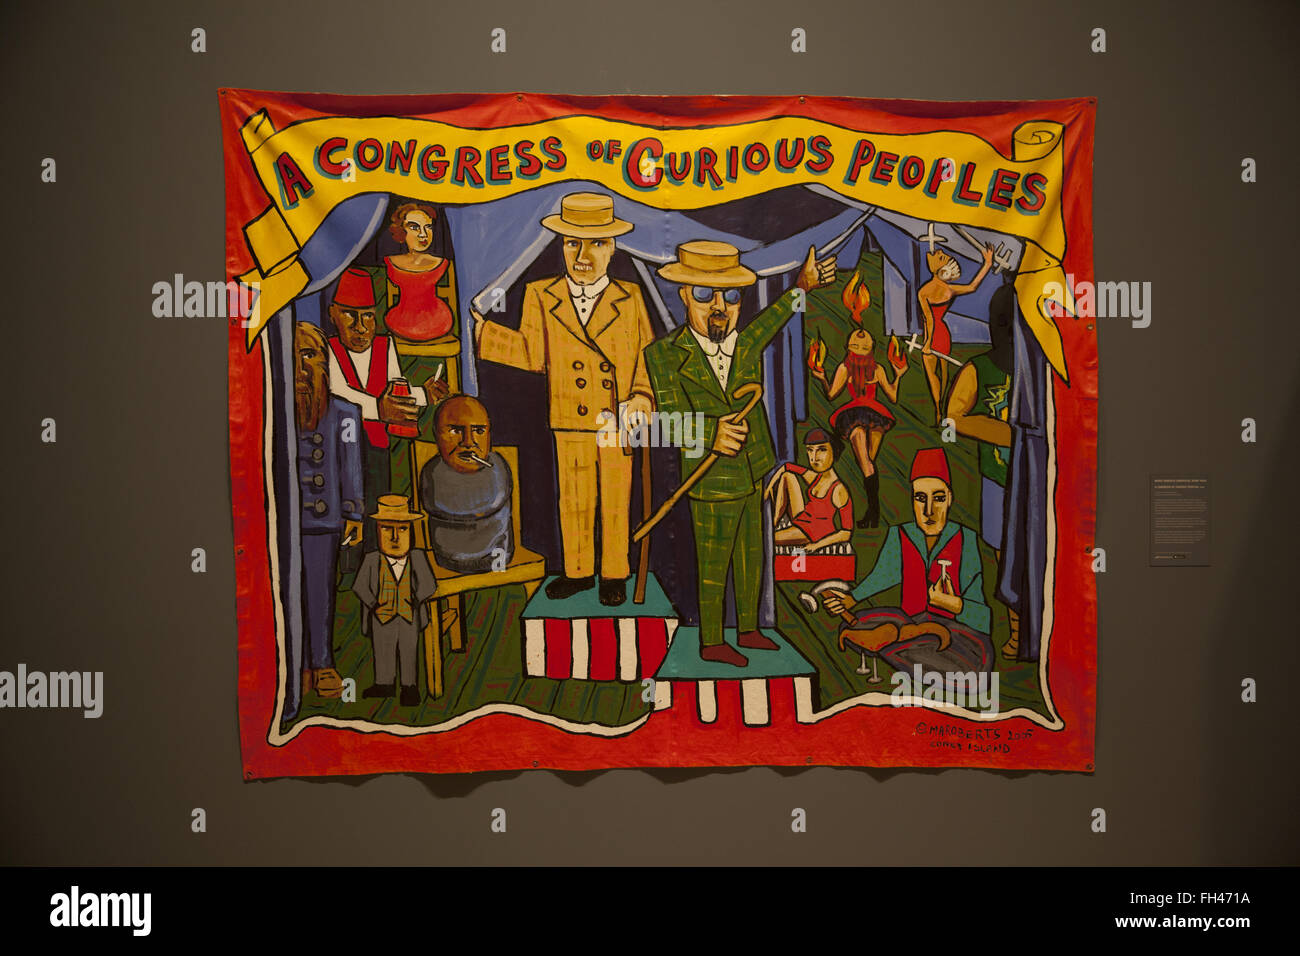 Original hand painted banners advertising acts in the 'Freak Show' at Coney Island shown here at the Coney Island Exhibition at the Brooklyn Museum.  (Marie Roberts, 2005) Stock Photo